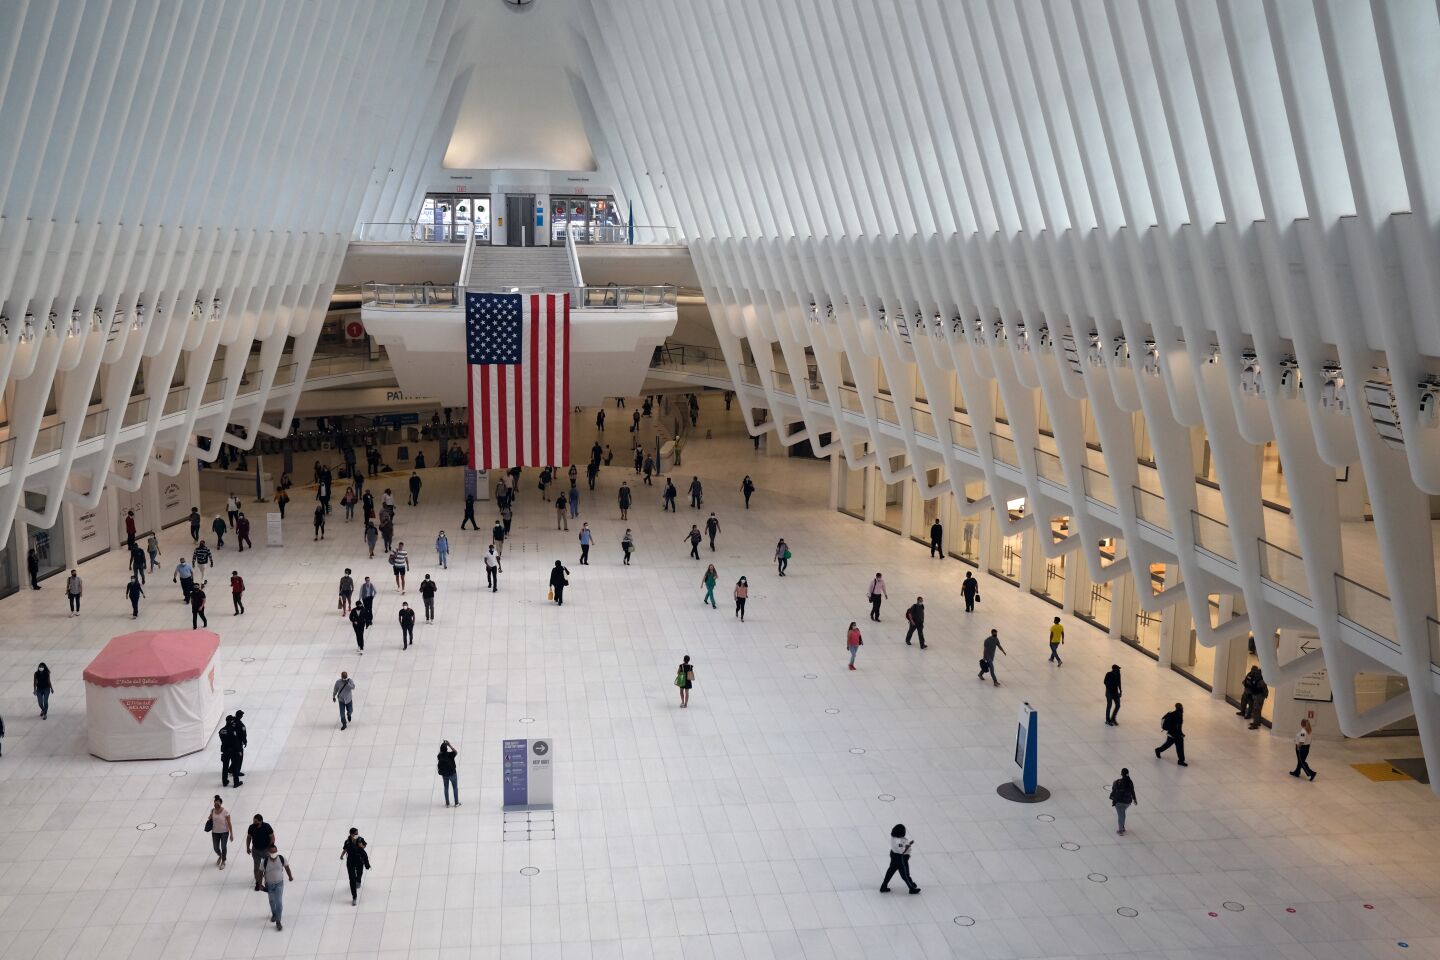 People walk through the Oculus transportation hub across from One World Trade Center